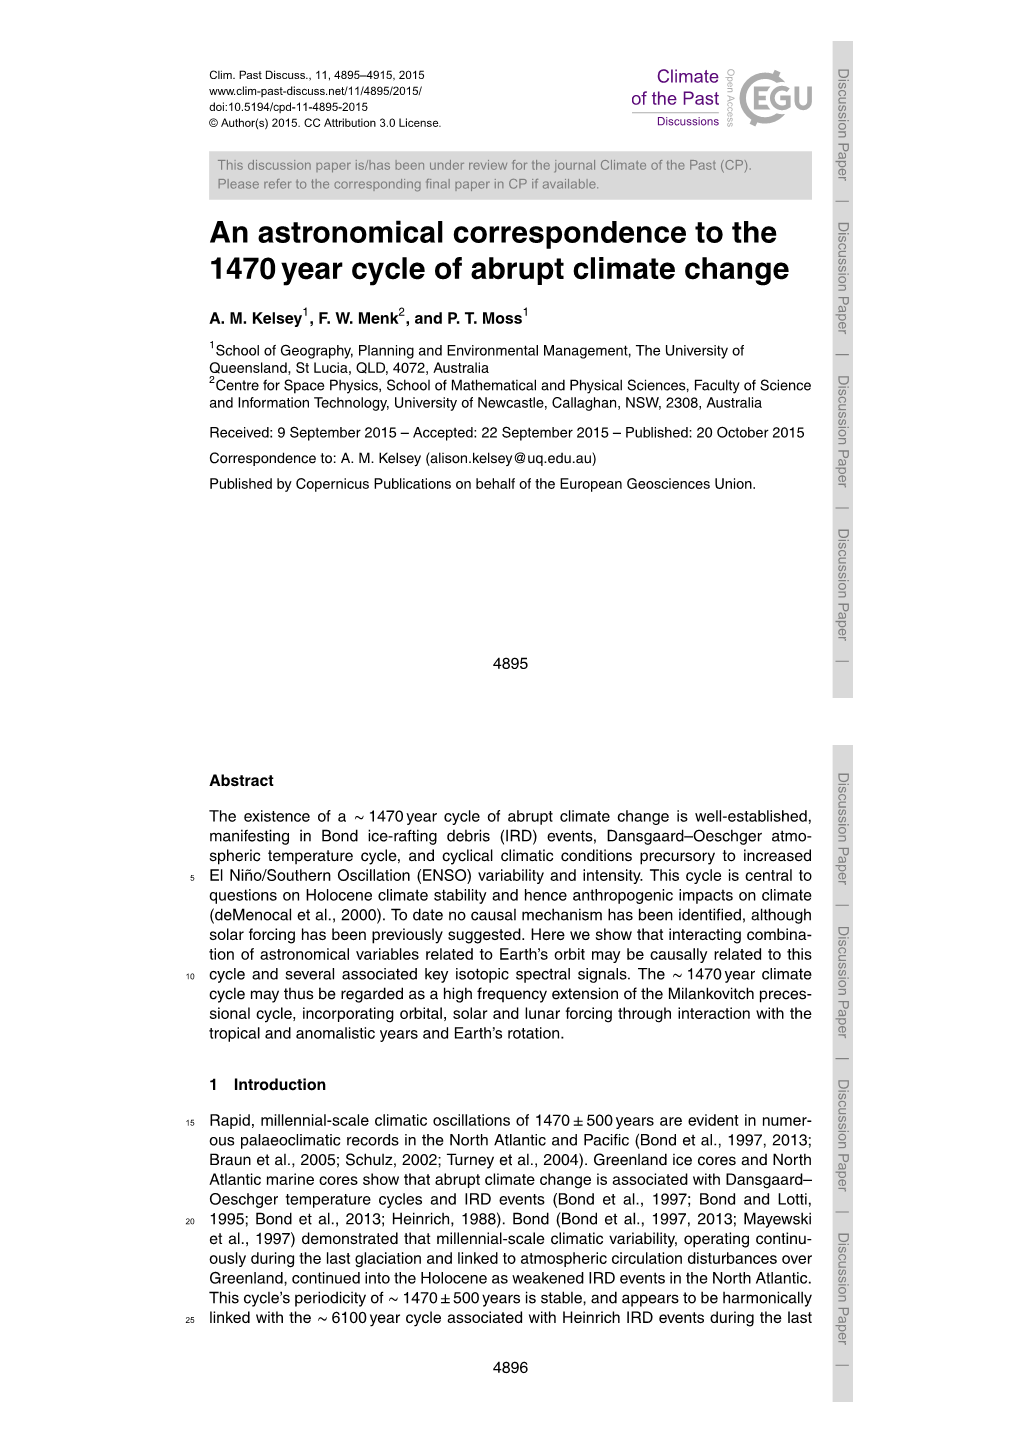 An Astronomical Correspondence to the 1470 Year Cycle of Abrupt Climatea